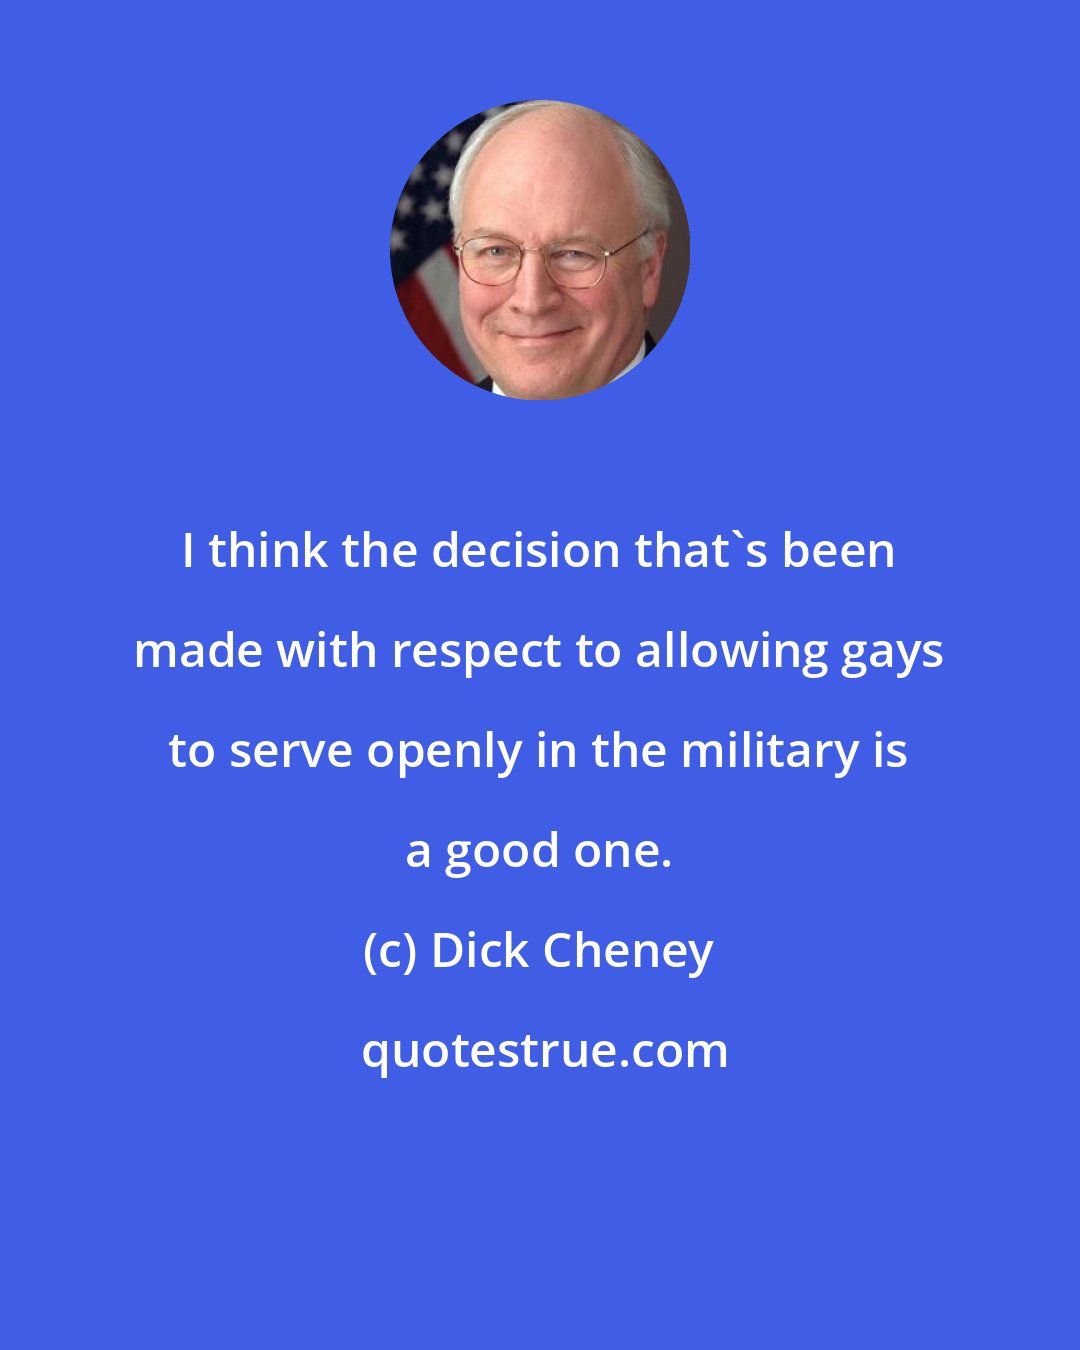 Dick Cheney: I think the decision that's been made with respect to allowing gays to serve openly in the military is a good one.